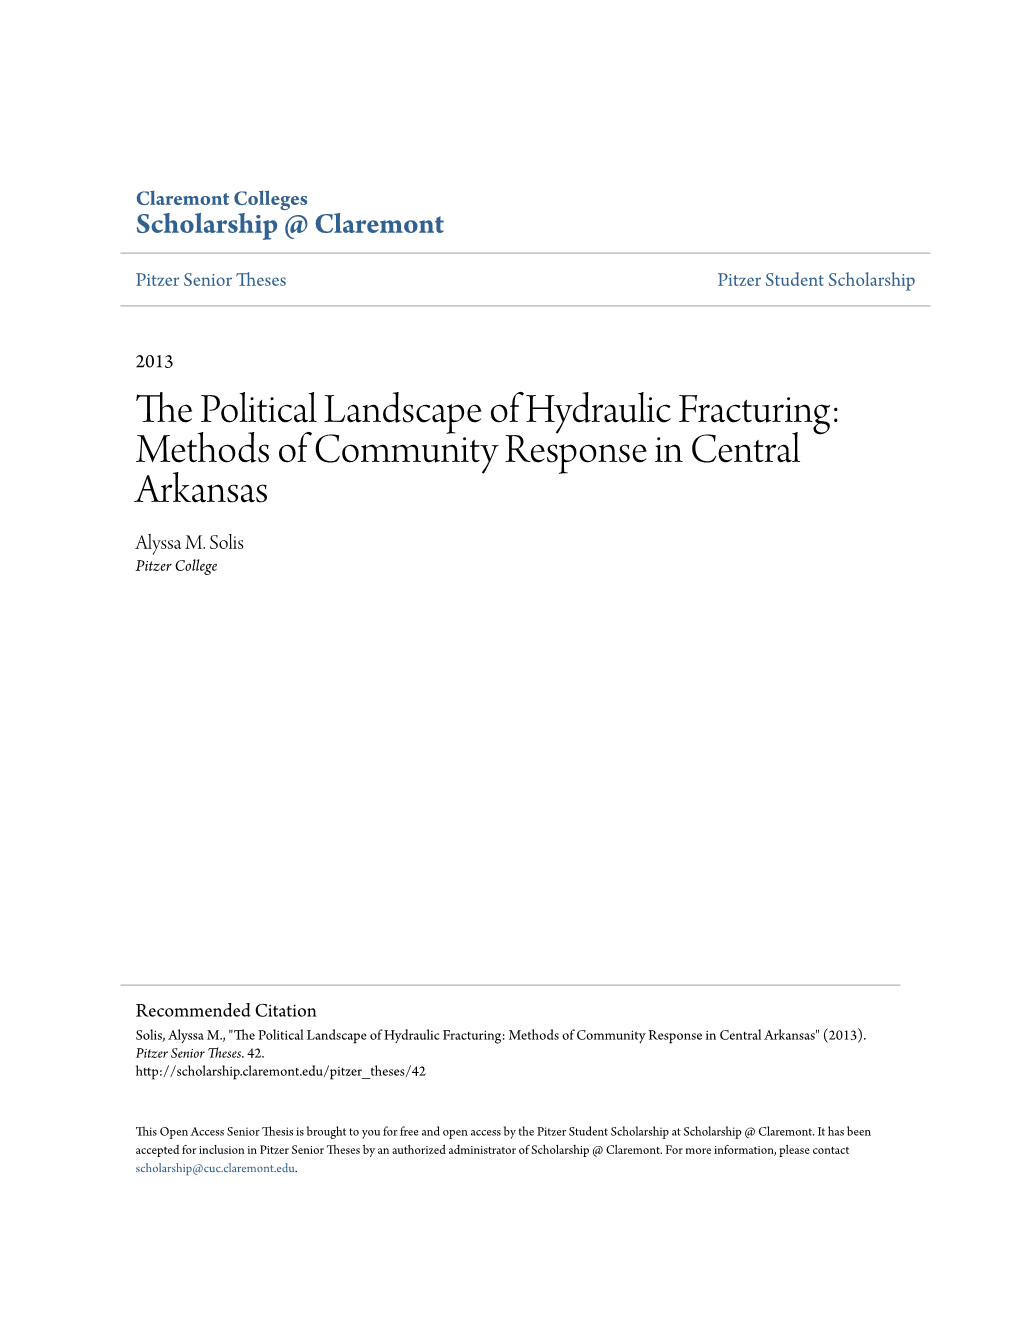 The Political Landscape of Hydraulic Fracturing: Methods of Community Response in Central Arkansas